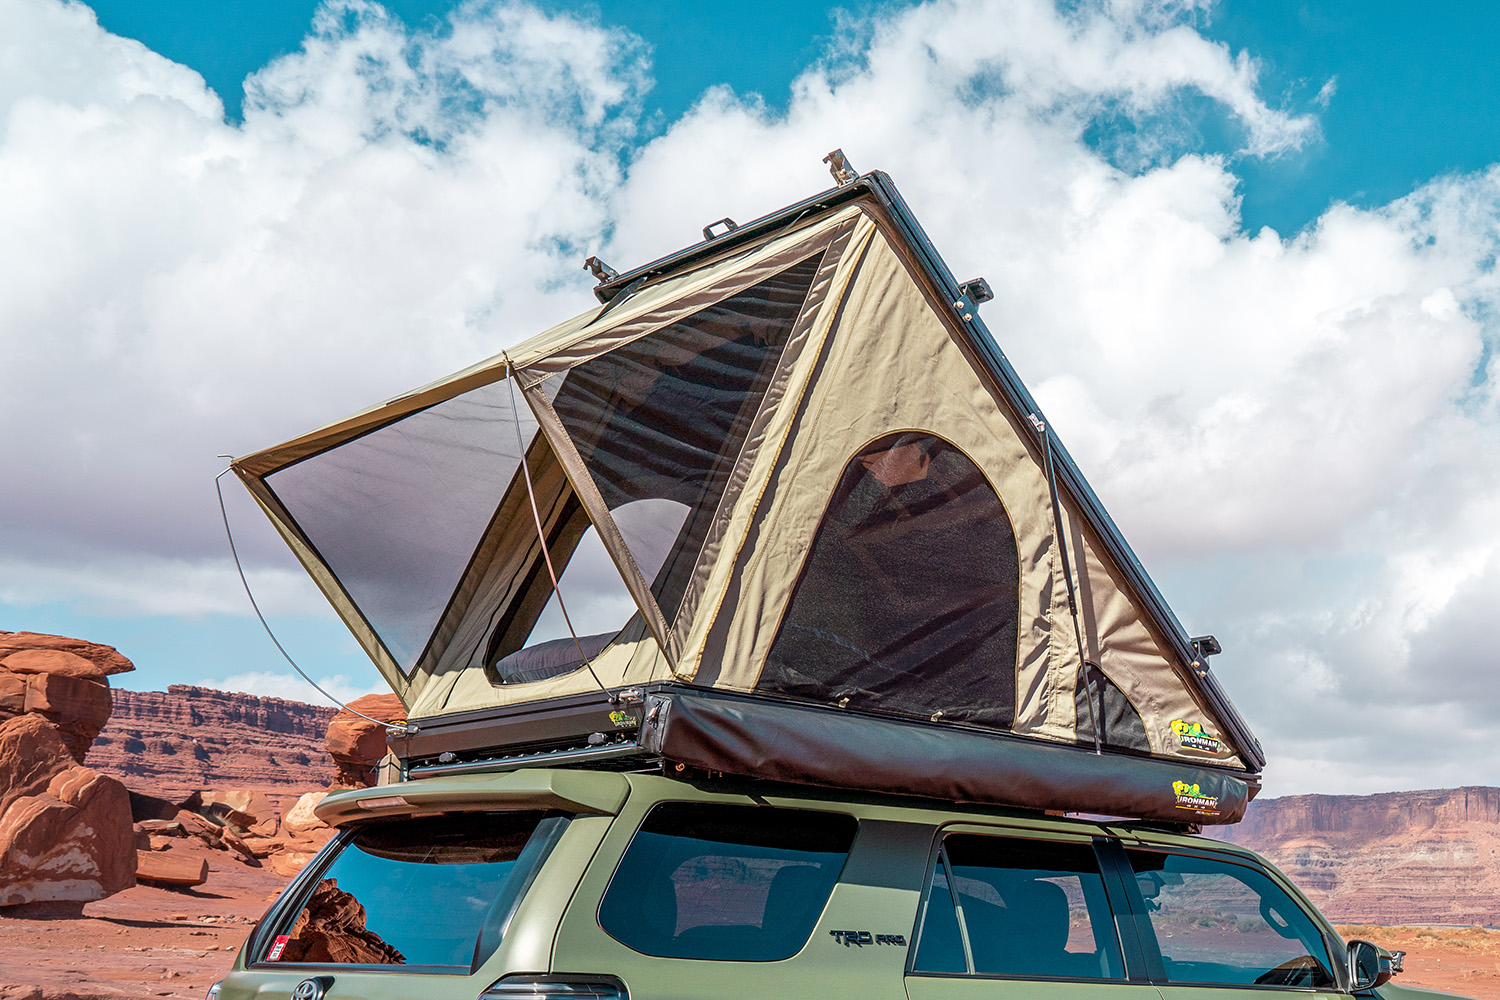 Which Ironman 4x4 roof rack would you recommend to mount the Swift 1400 Rooftop Tent? I drive a 2019 4Runner.